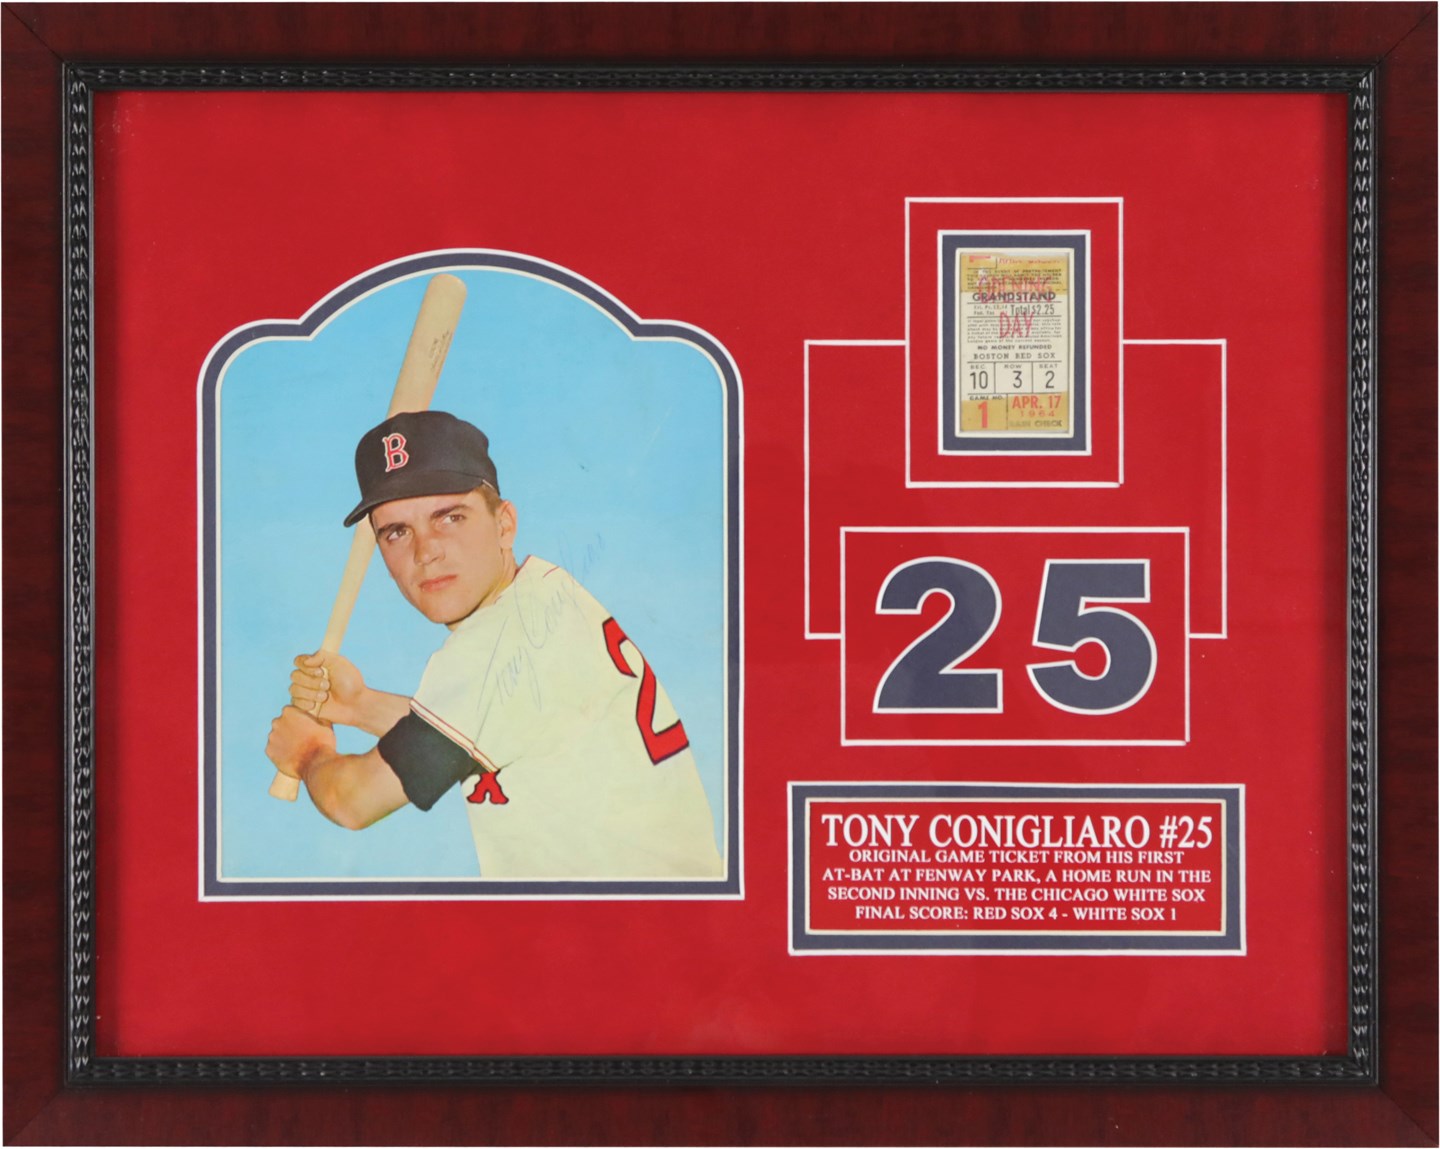 Tony Conigliaro Fenway Park Debut & 1st Home Run Ticket Stub with Signed Photo Display (PSA)